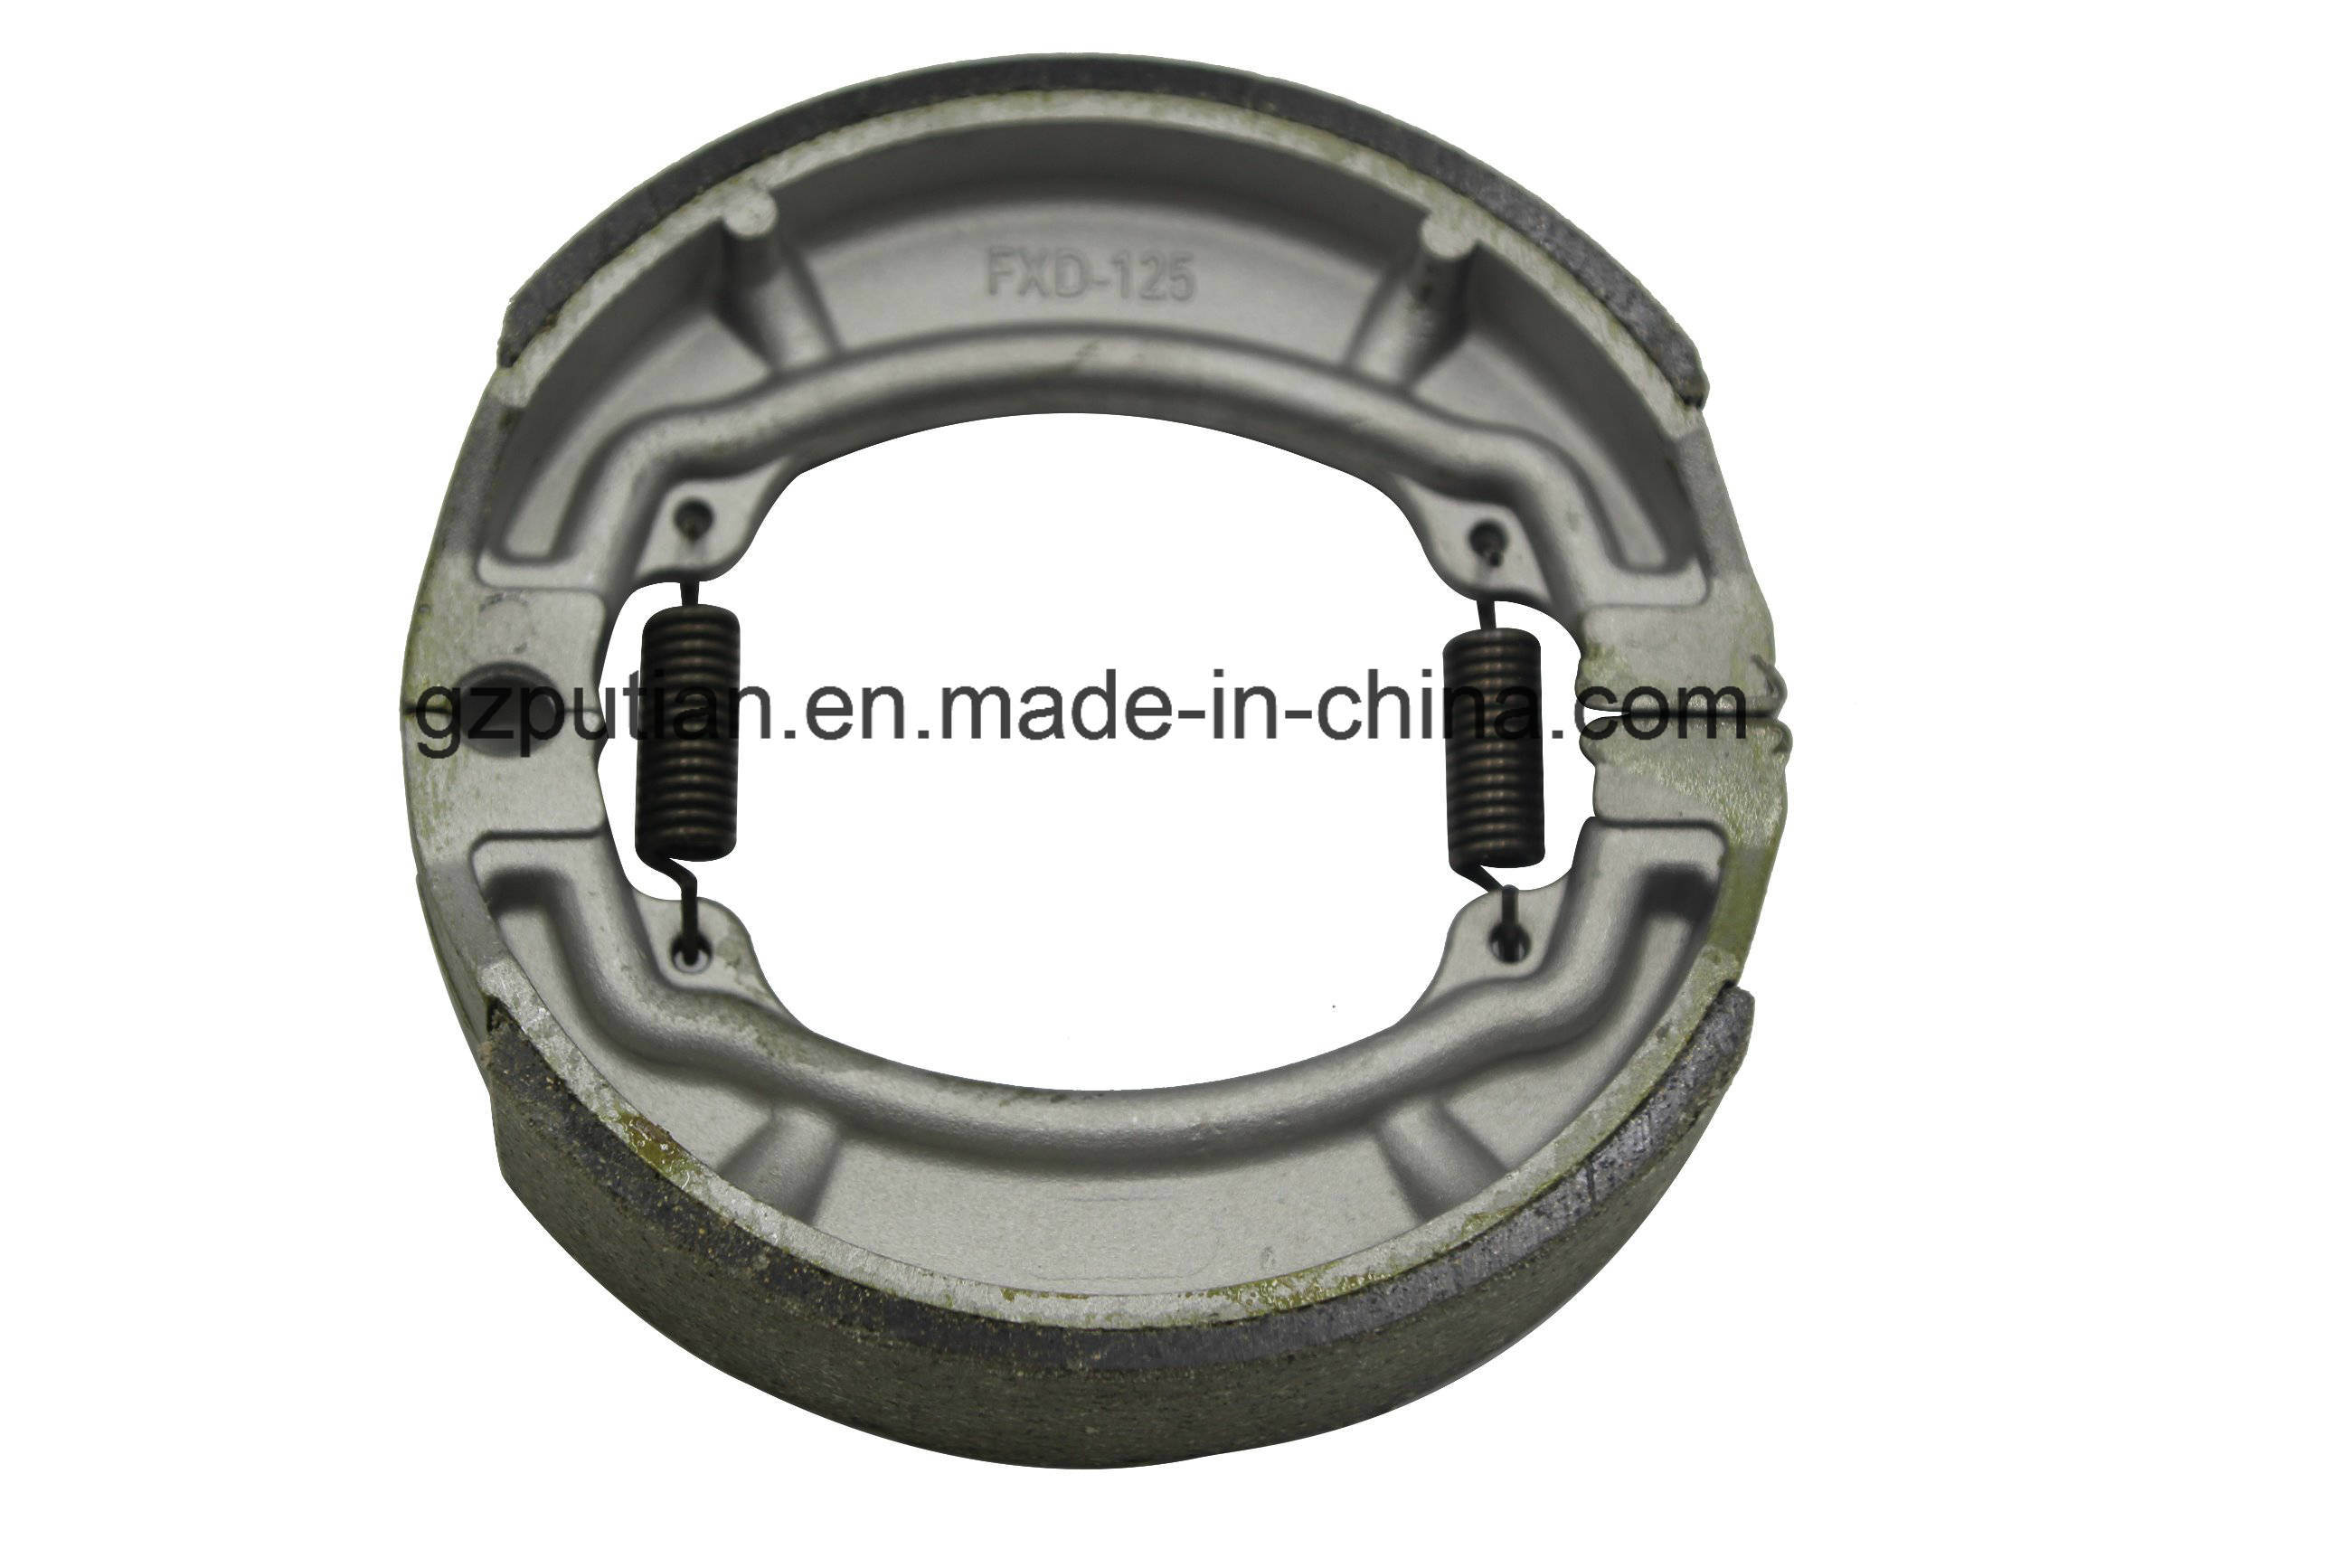 China High Performance Motorcycle Brake Shoes Fxd125